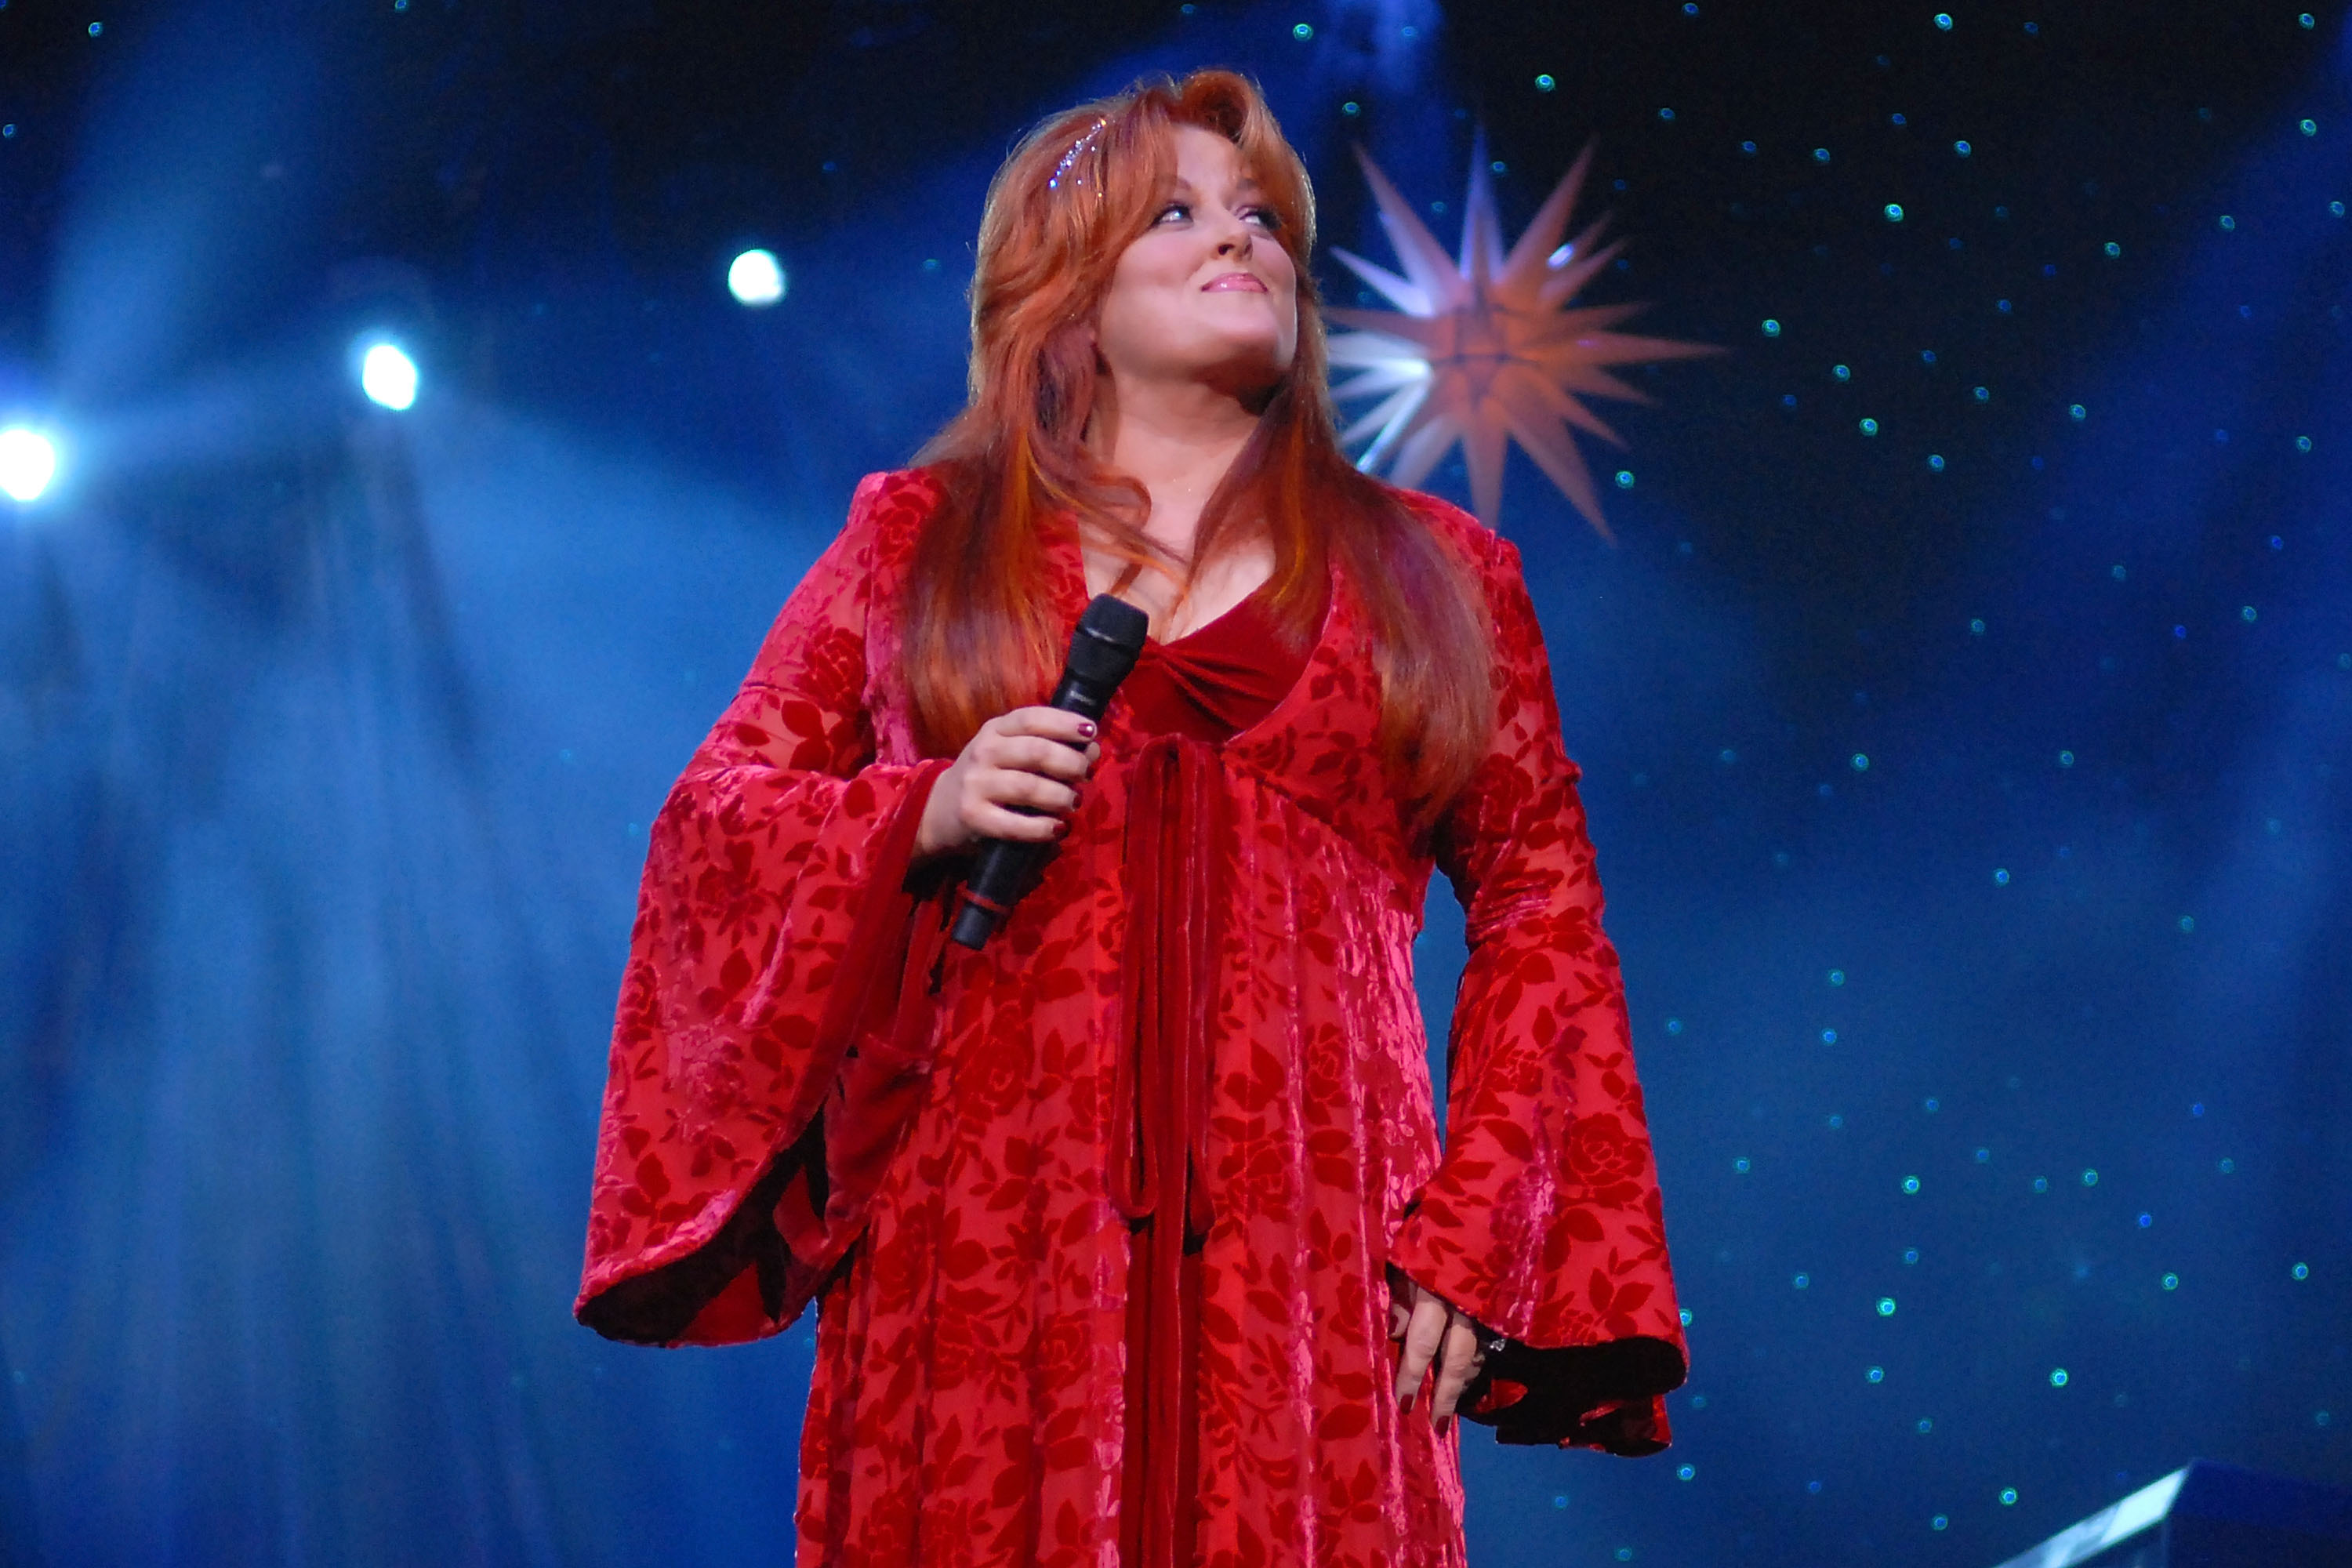 Wynonna Judd performs live on November 26, 2007 in Hollywood, Florida | Source: Getty Images